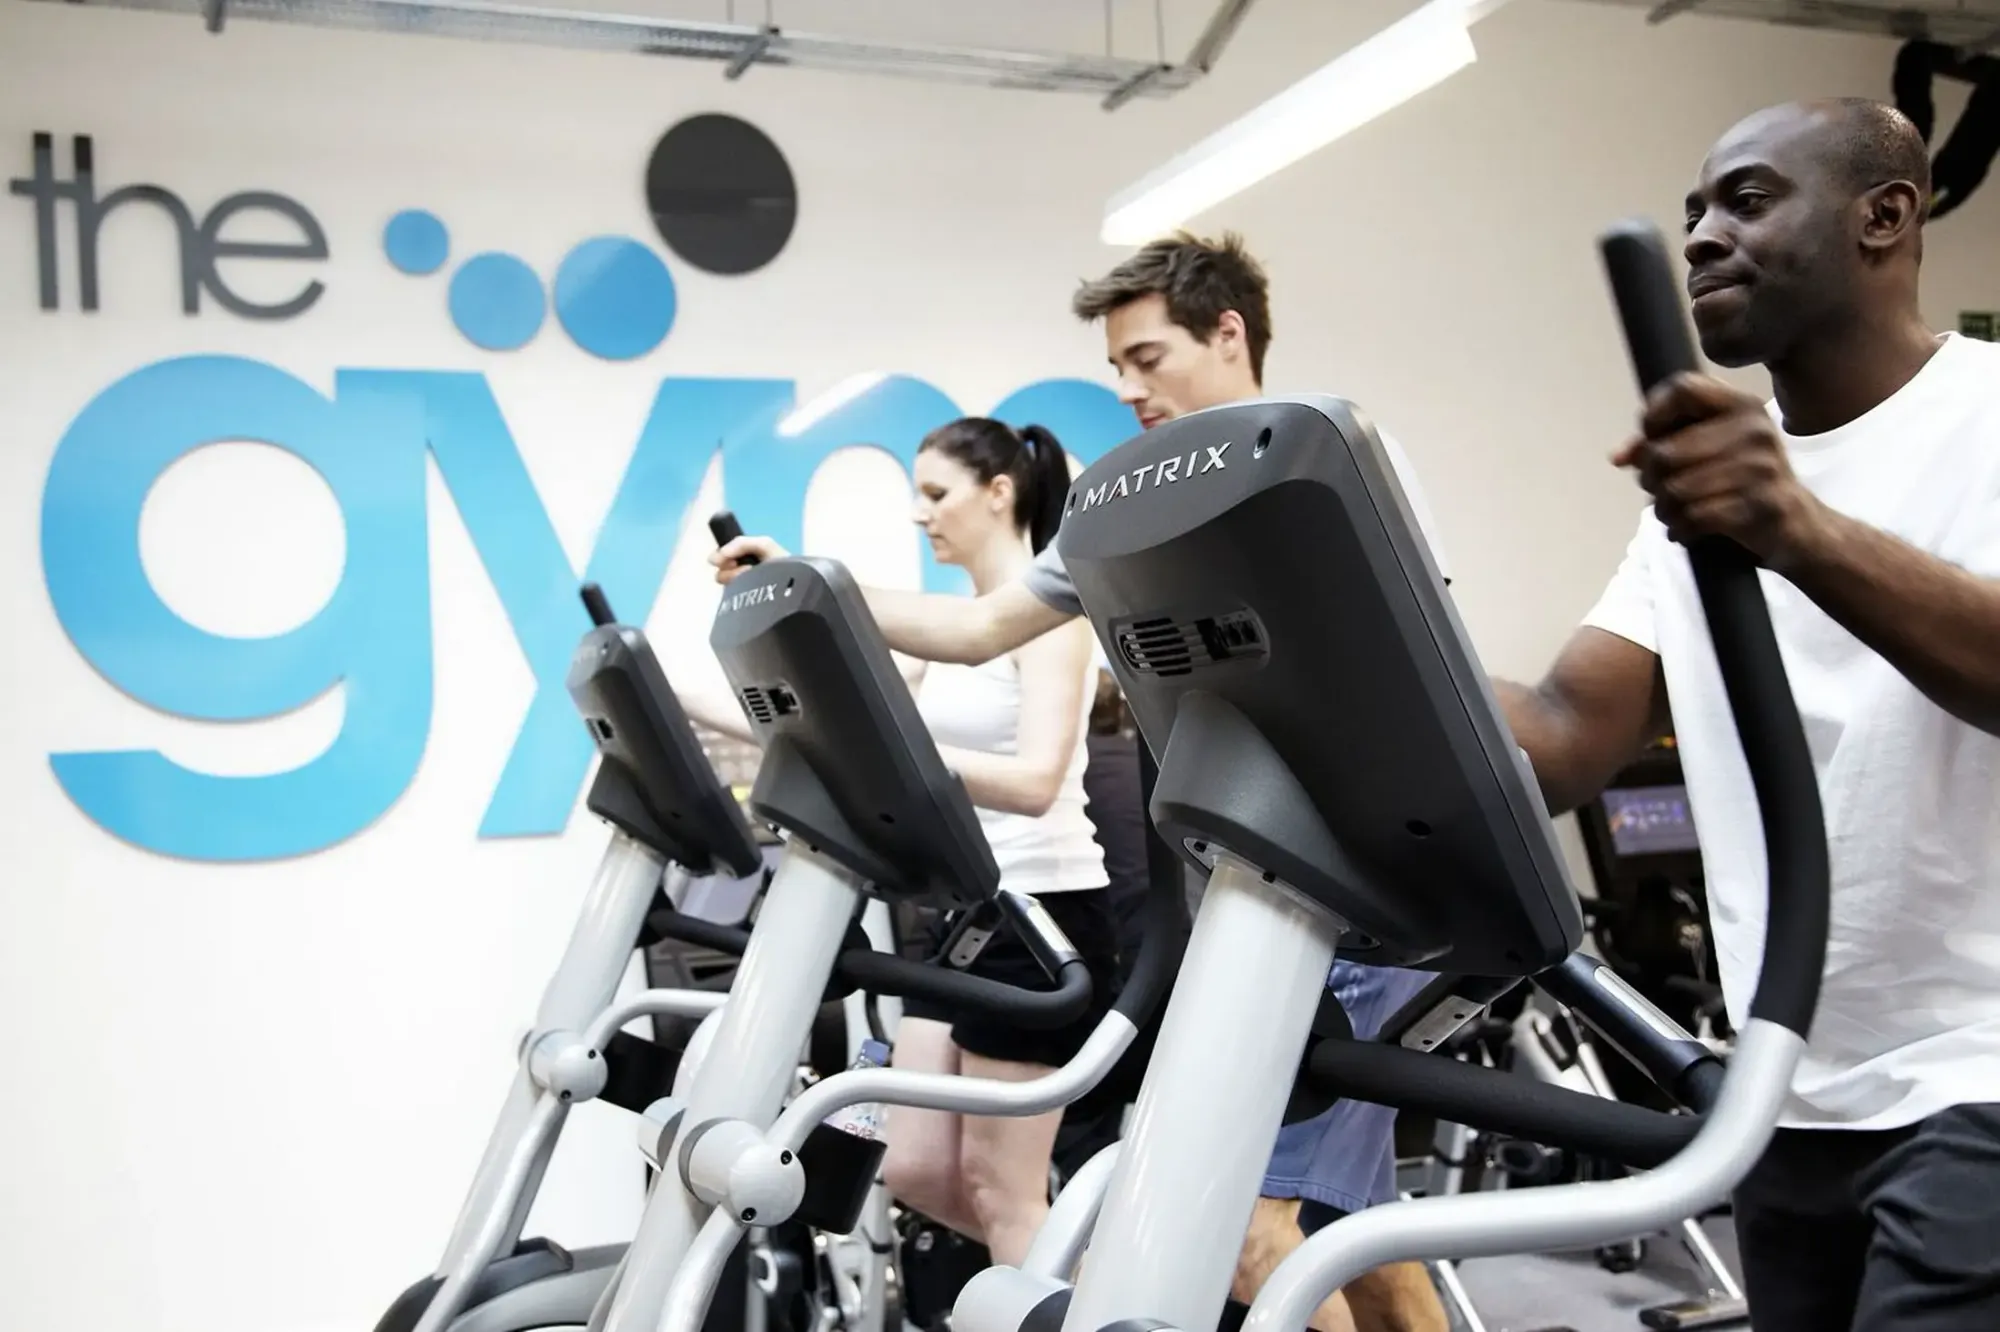 The Gym Group has over 100 locations nationwide